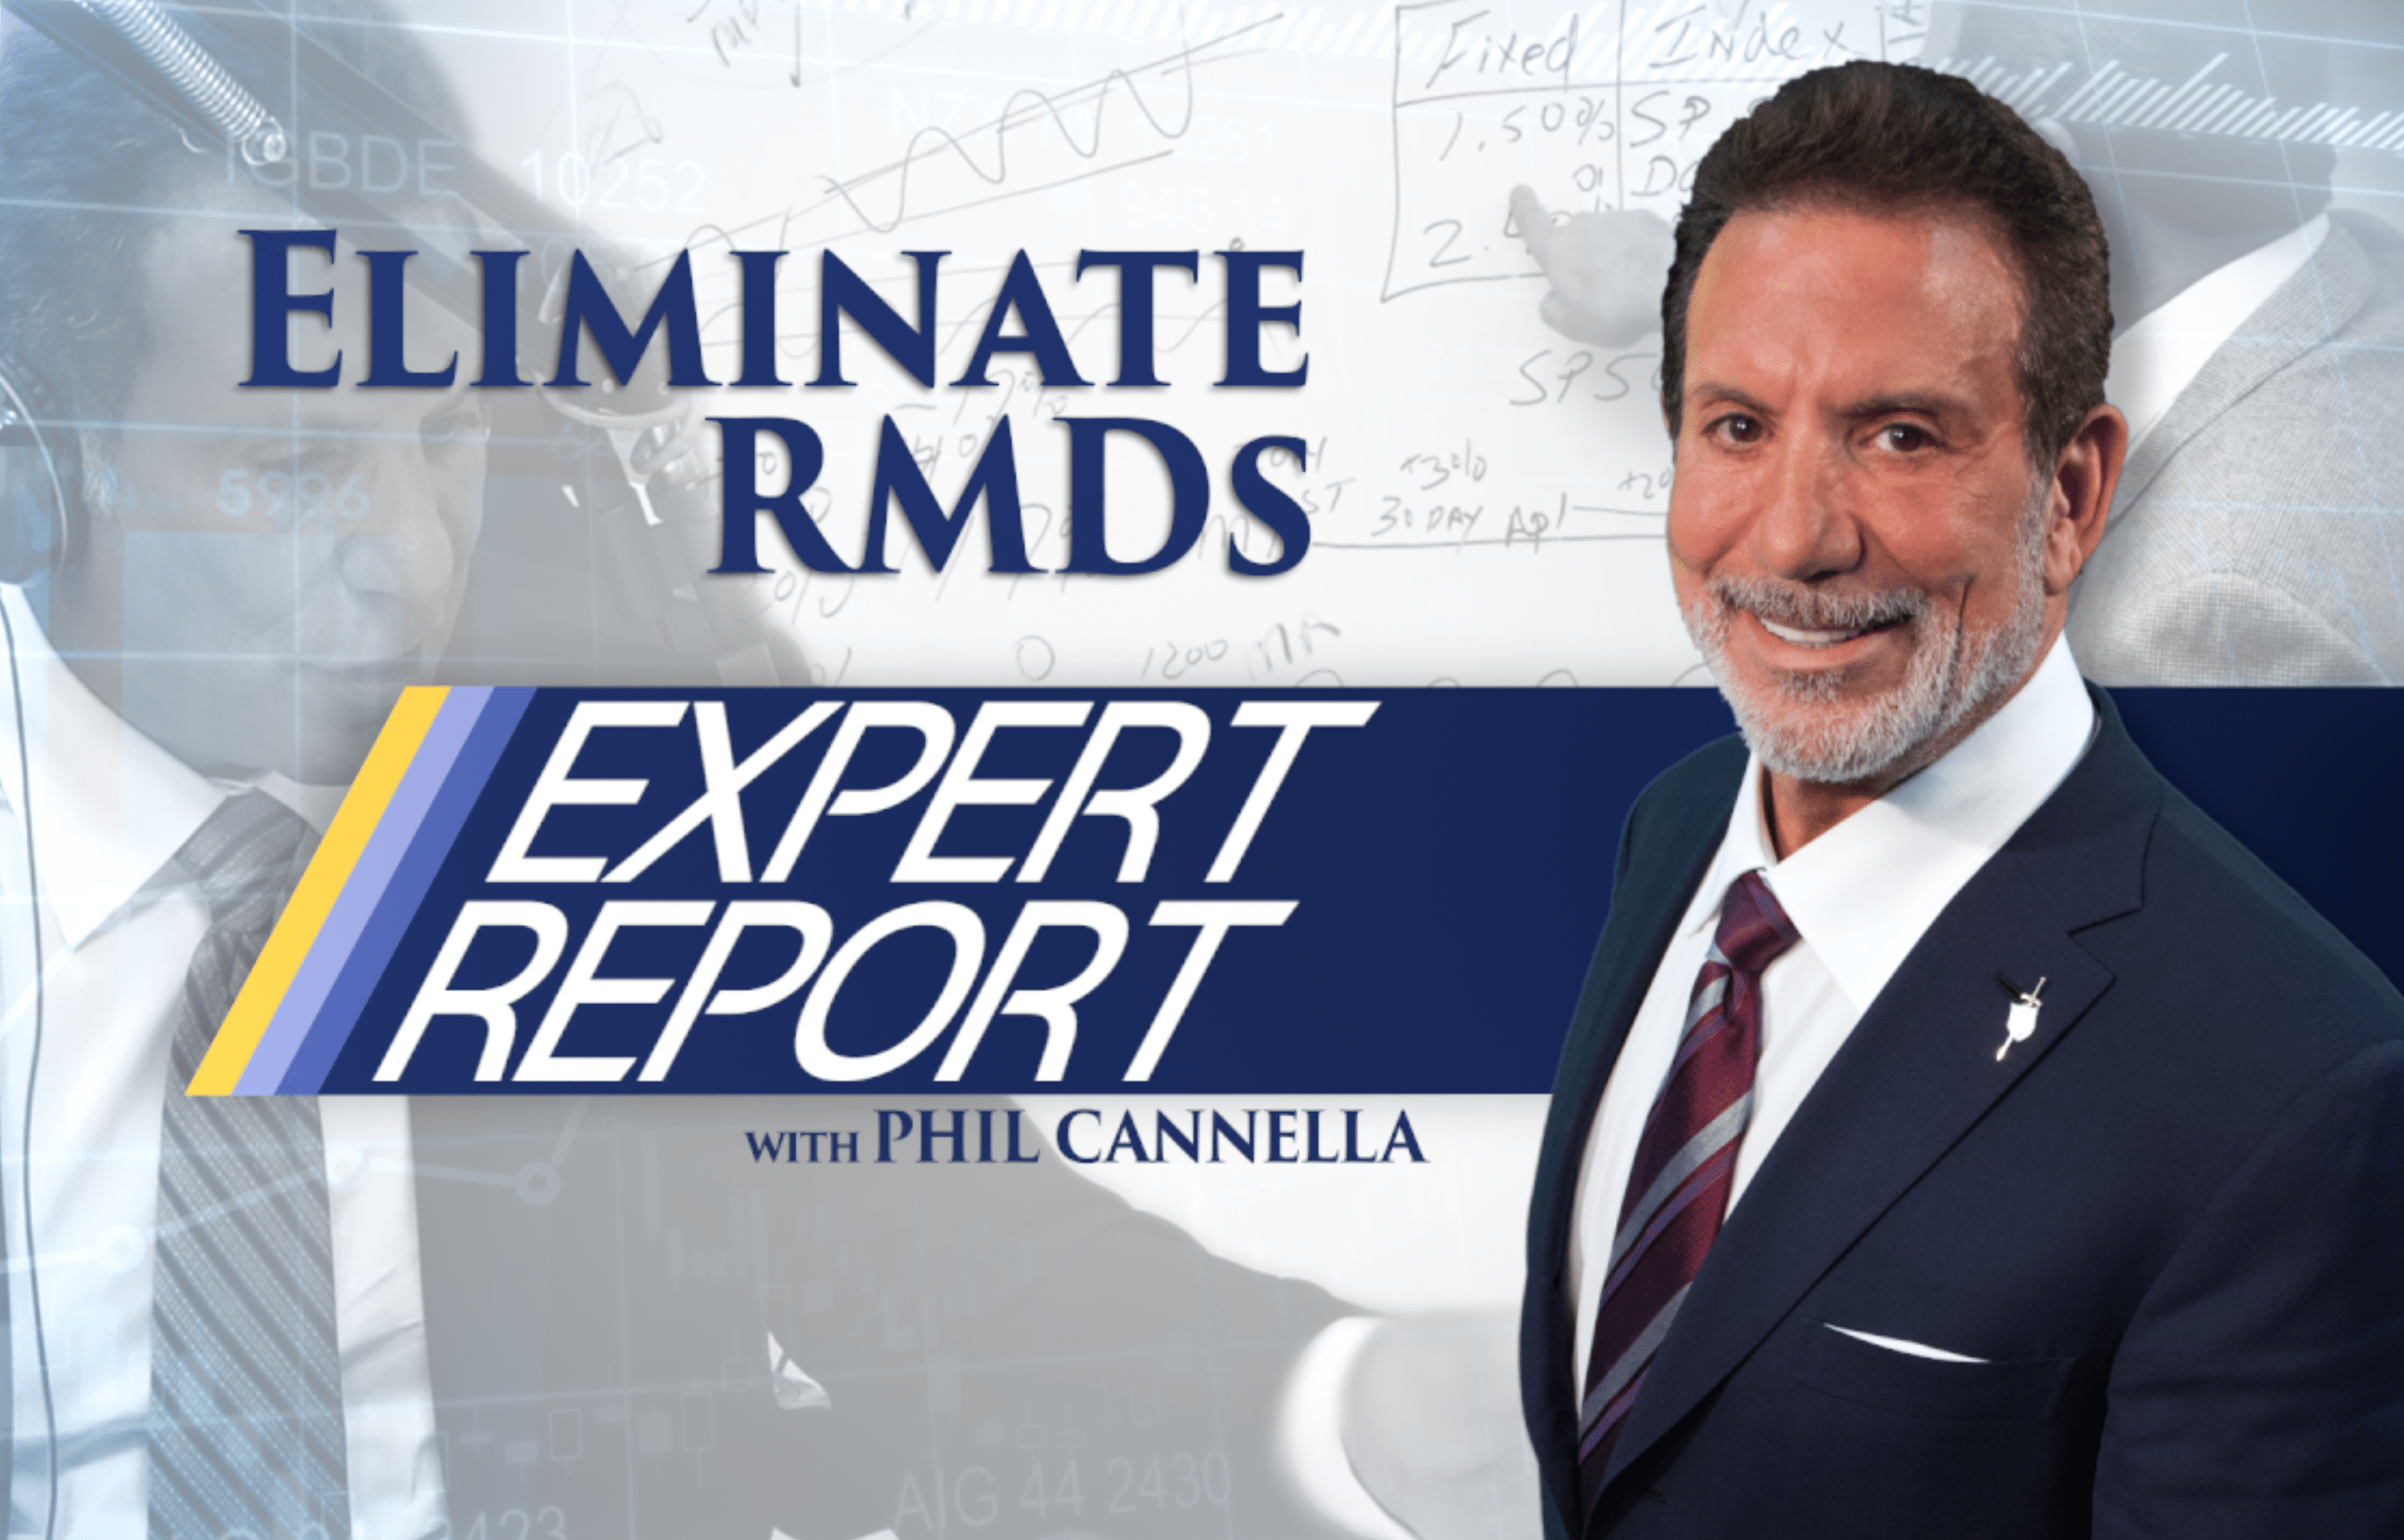 Expert Report: The Little Known Law That Will Eliminate RMDs From Your Retirement Account